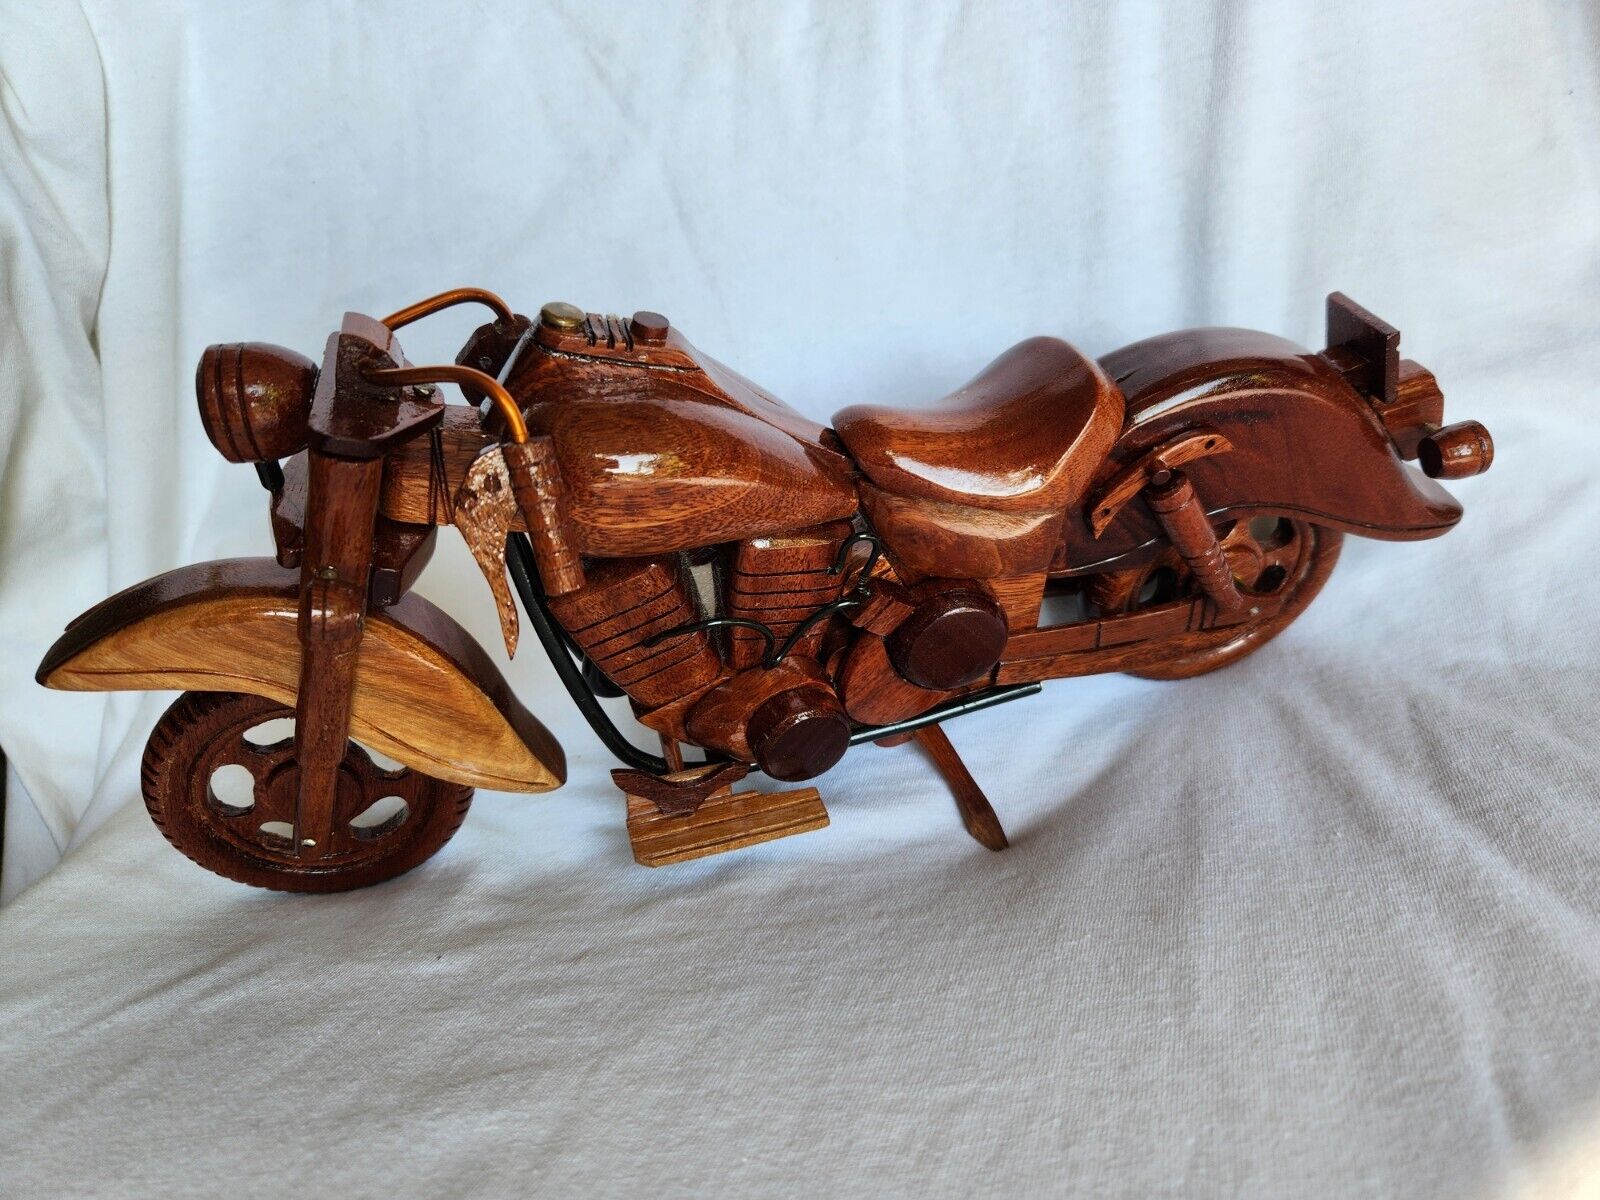 Wooden Motorcycle Mahogany Model Harley Davidson Indian style Handcrafted Carved